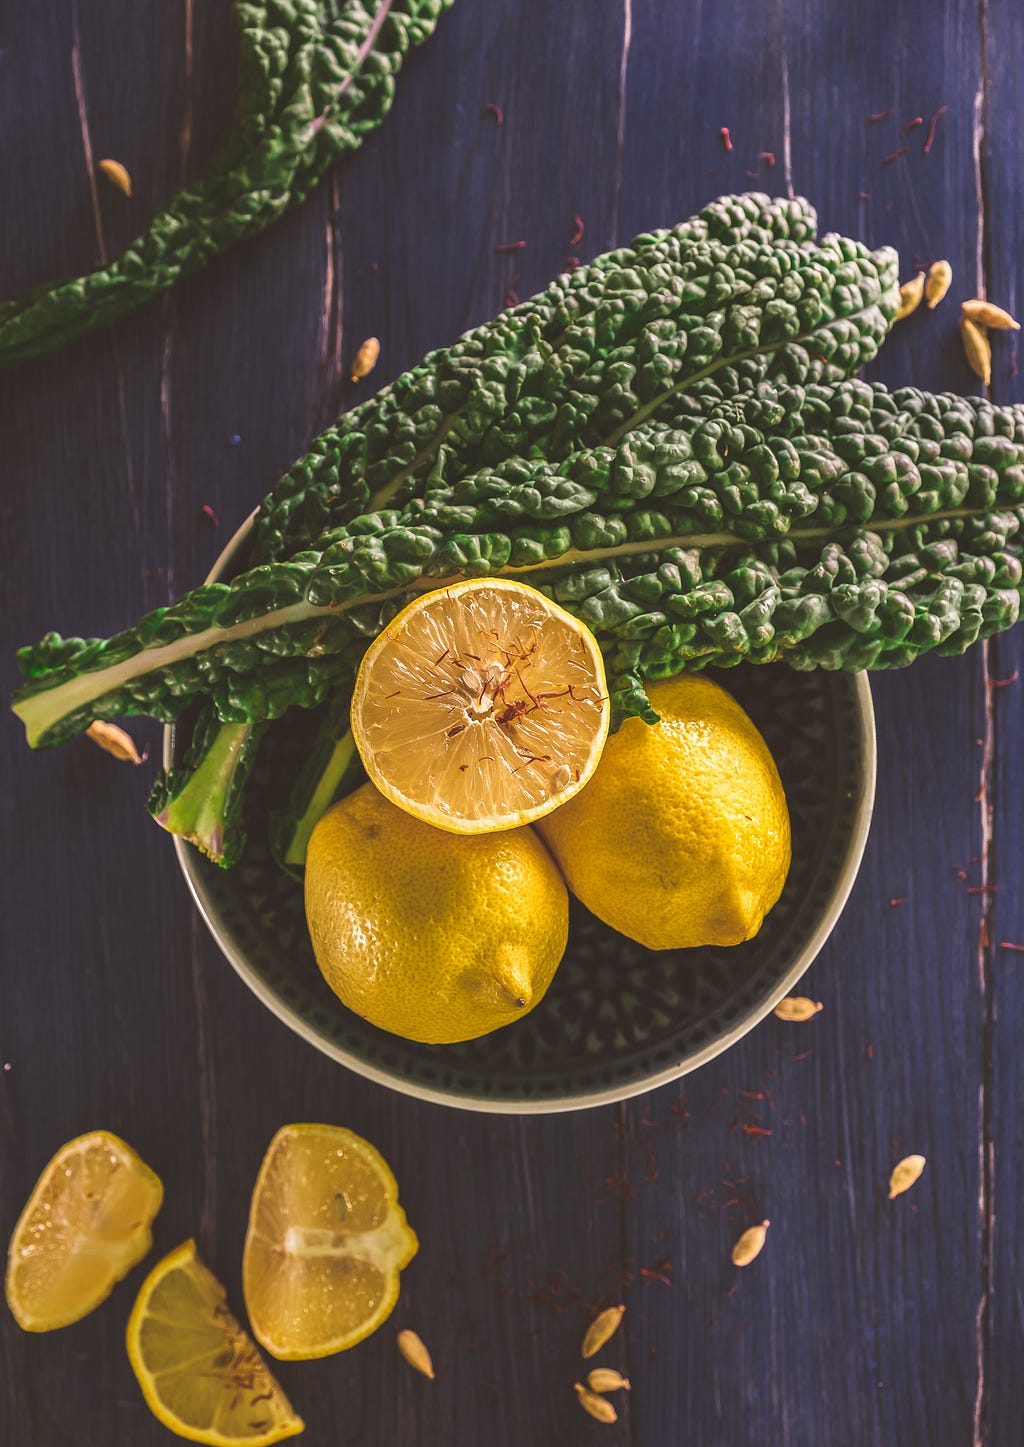 A decorative bowl full of fresh kale and lemons on a dark wooden table.